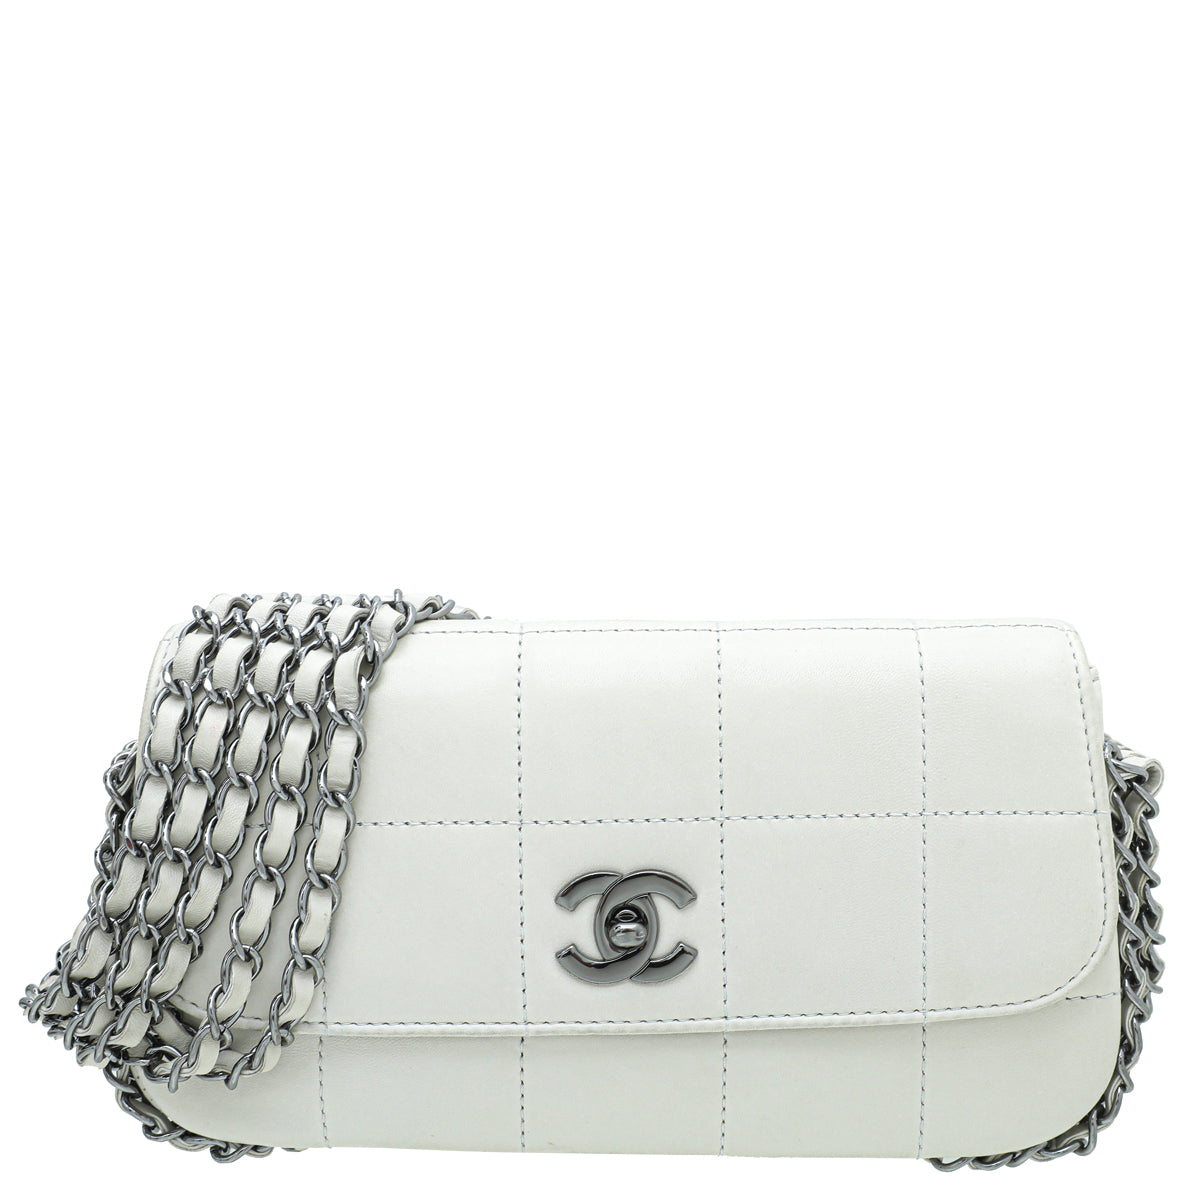 CHANEL Quilted CHANEL Classic Flap Handbags & Bags for Women